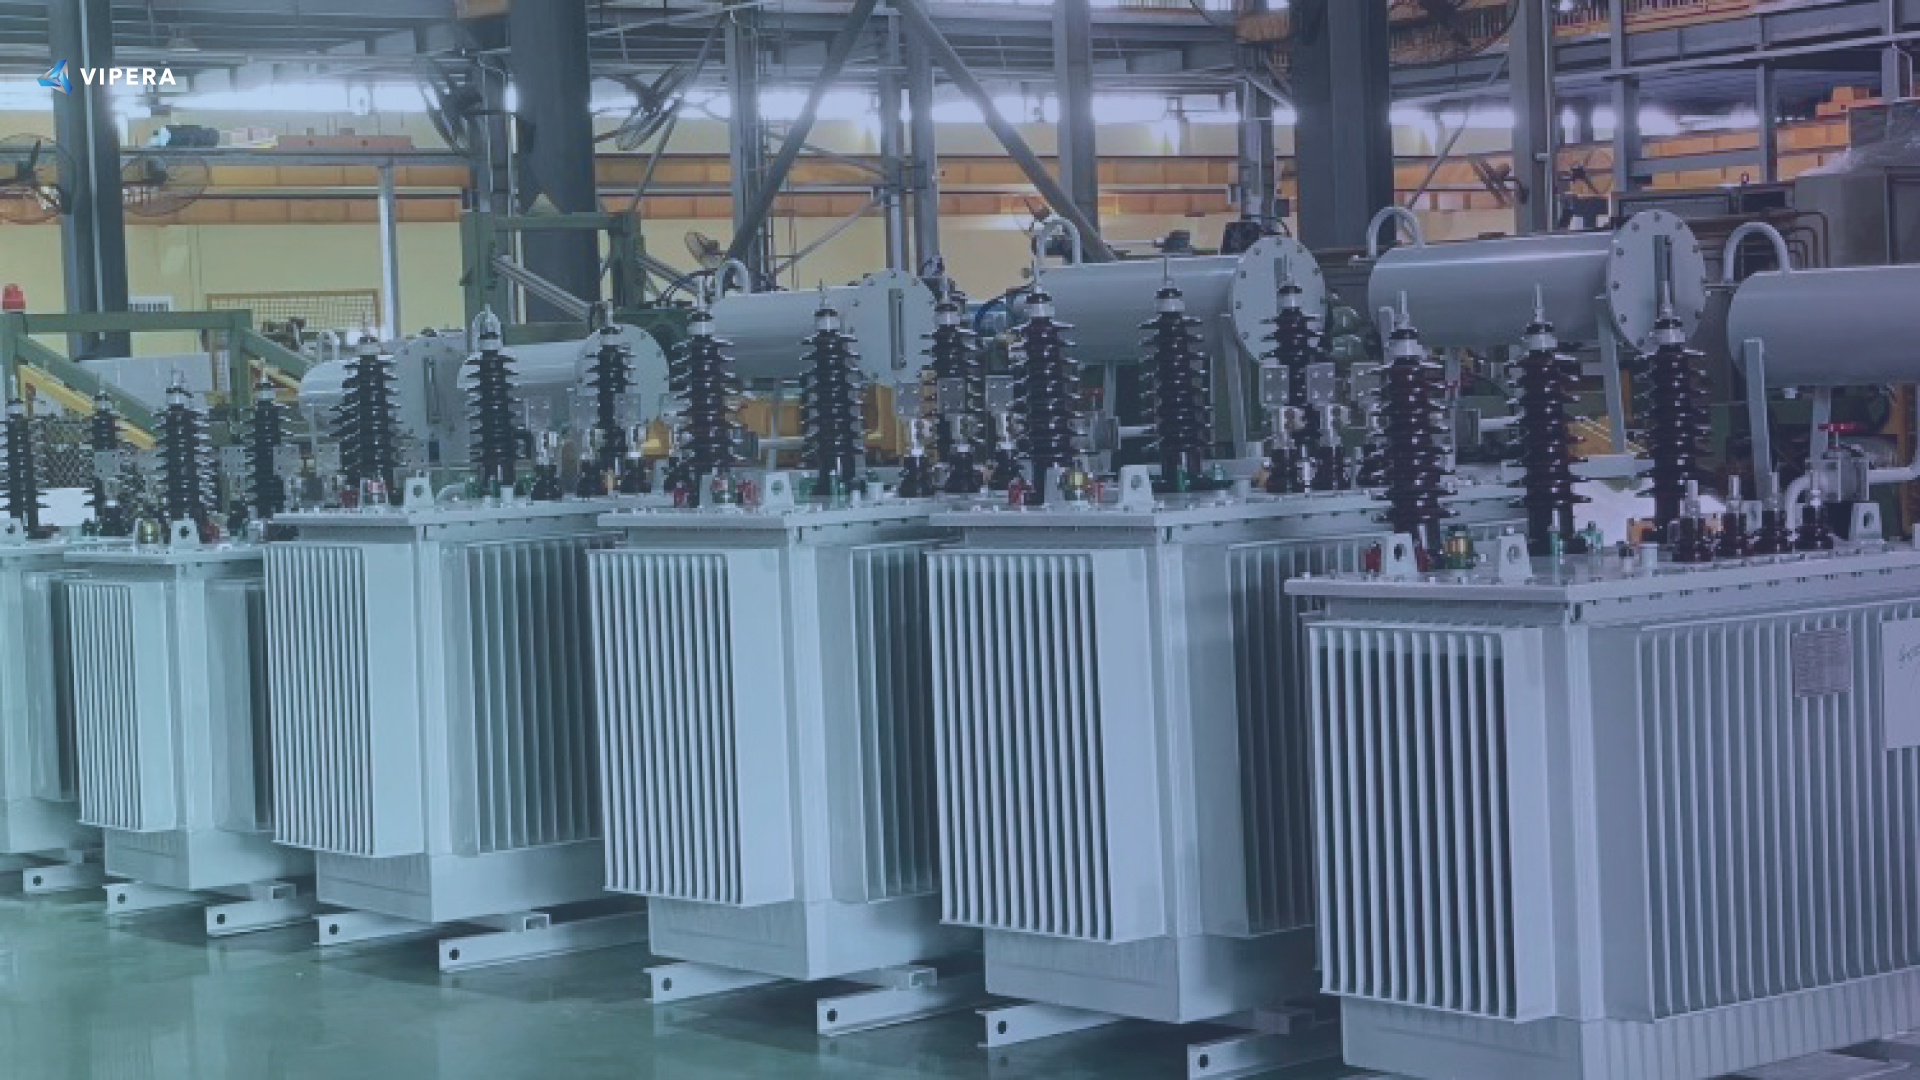 Differences between IEC and IEEE standards of transformers